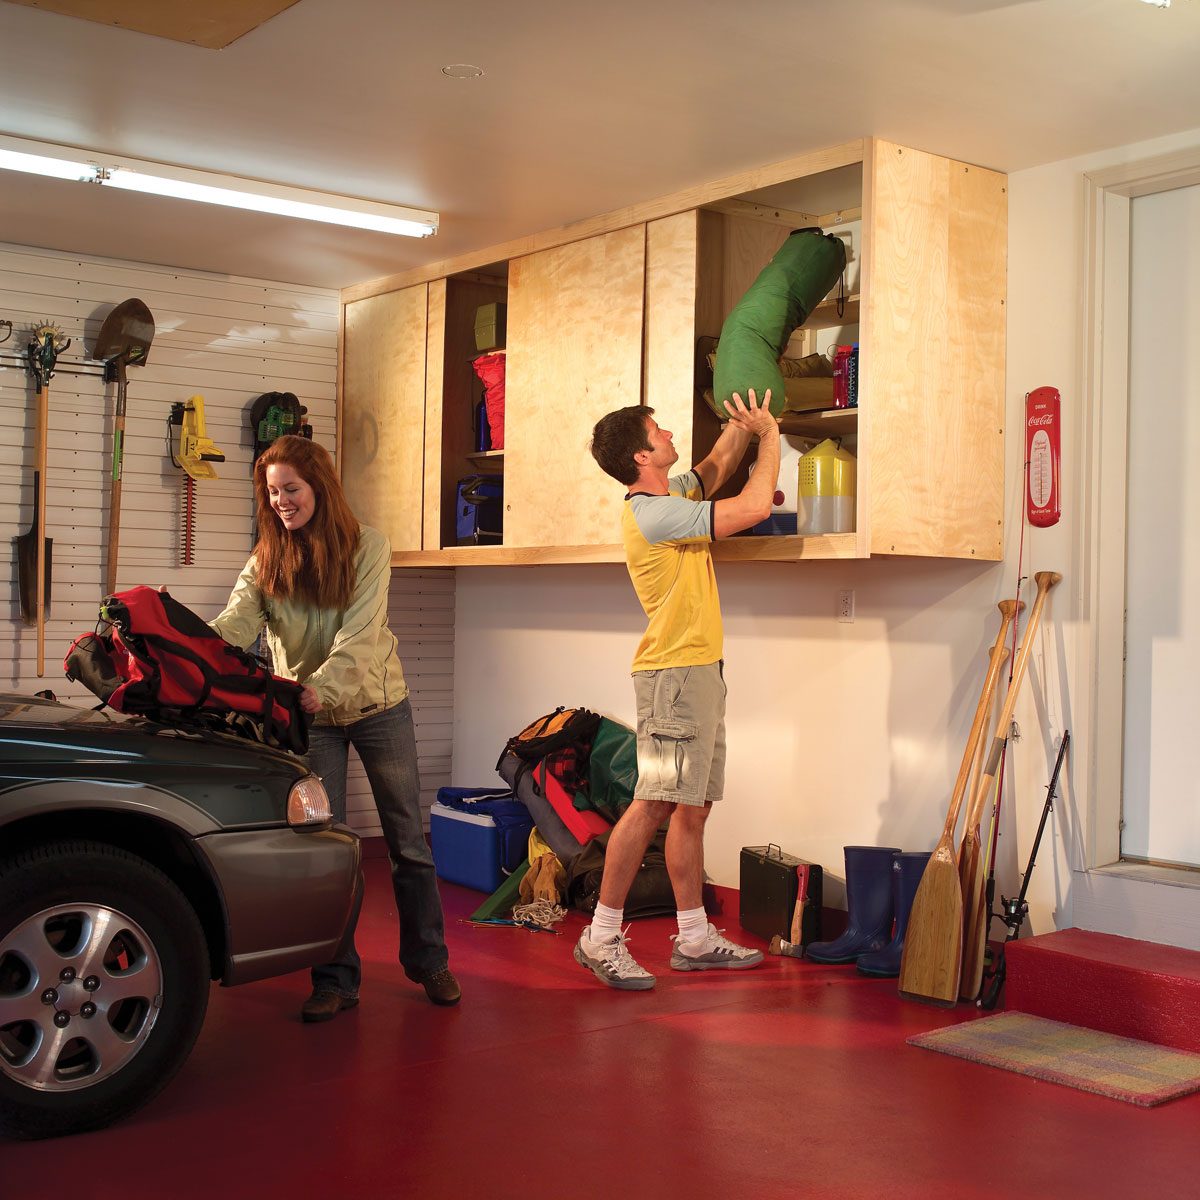 How To Build and Install Garage Cabinets with Sliding Doors